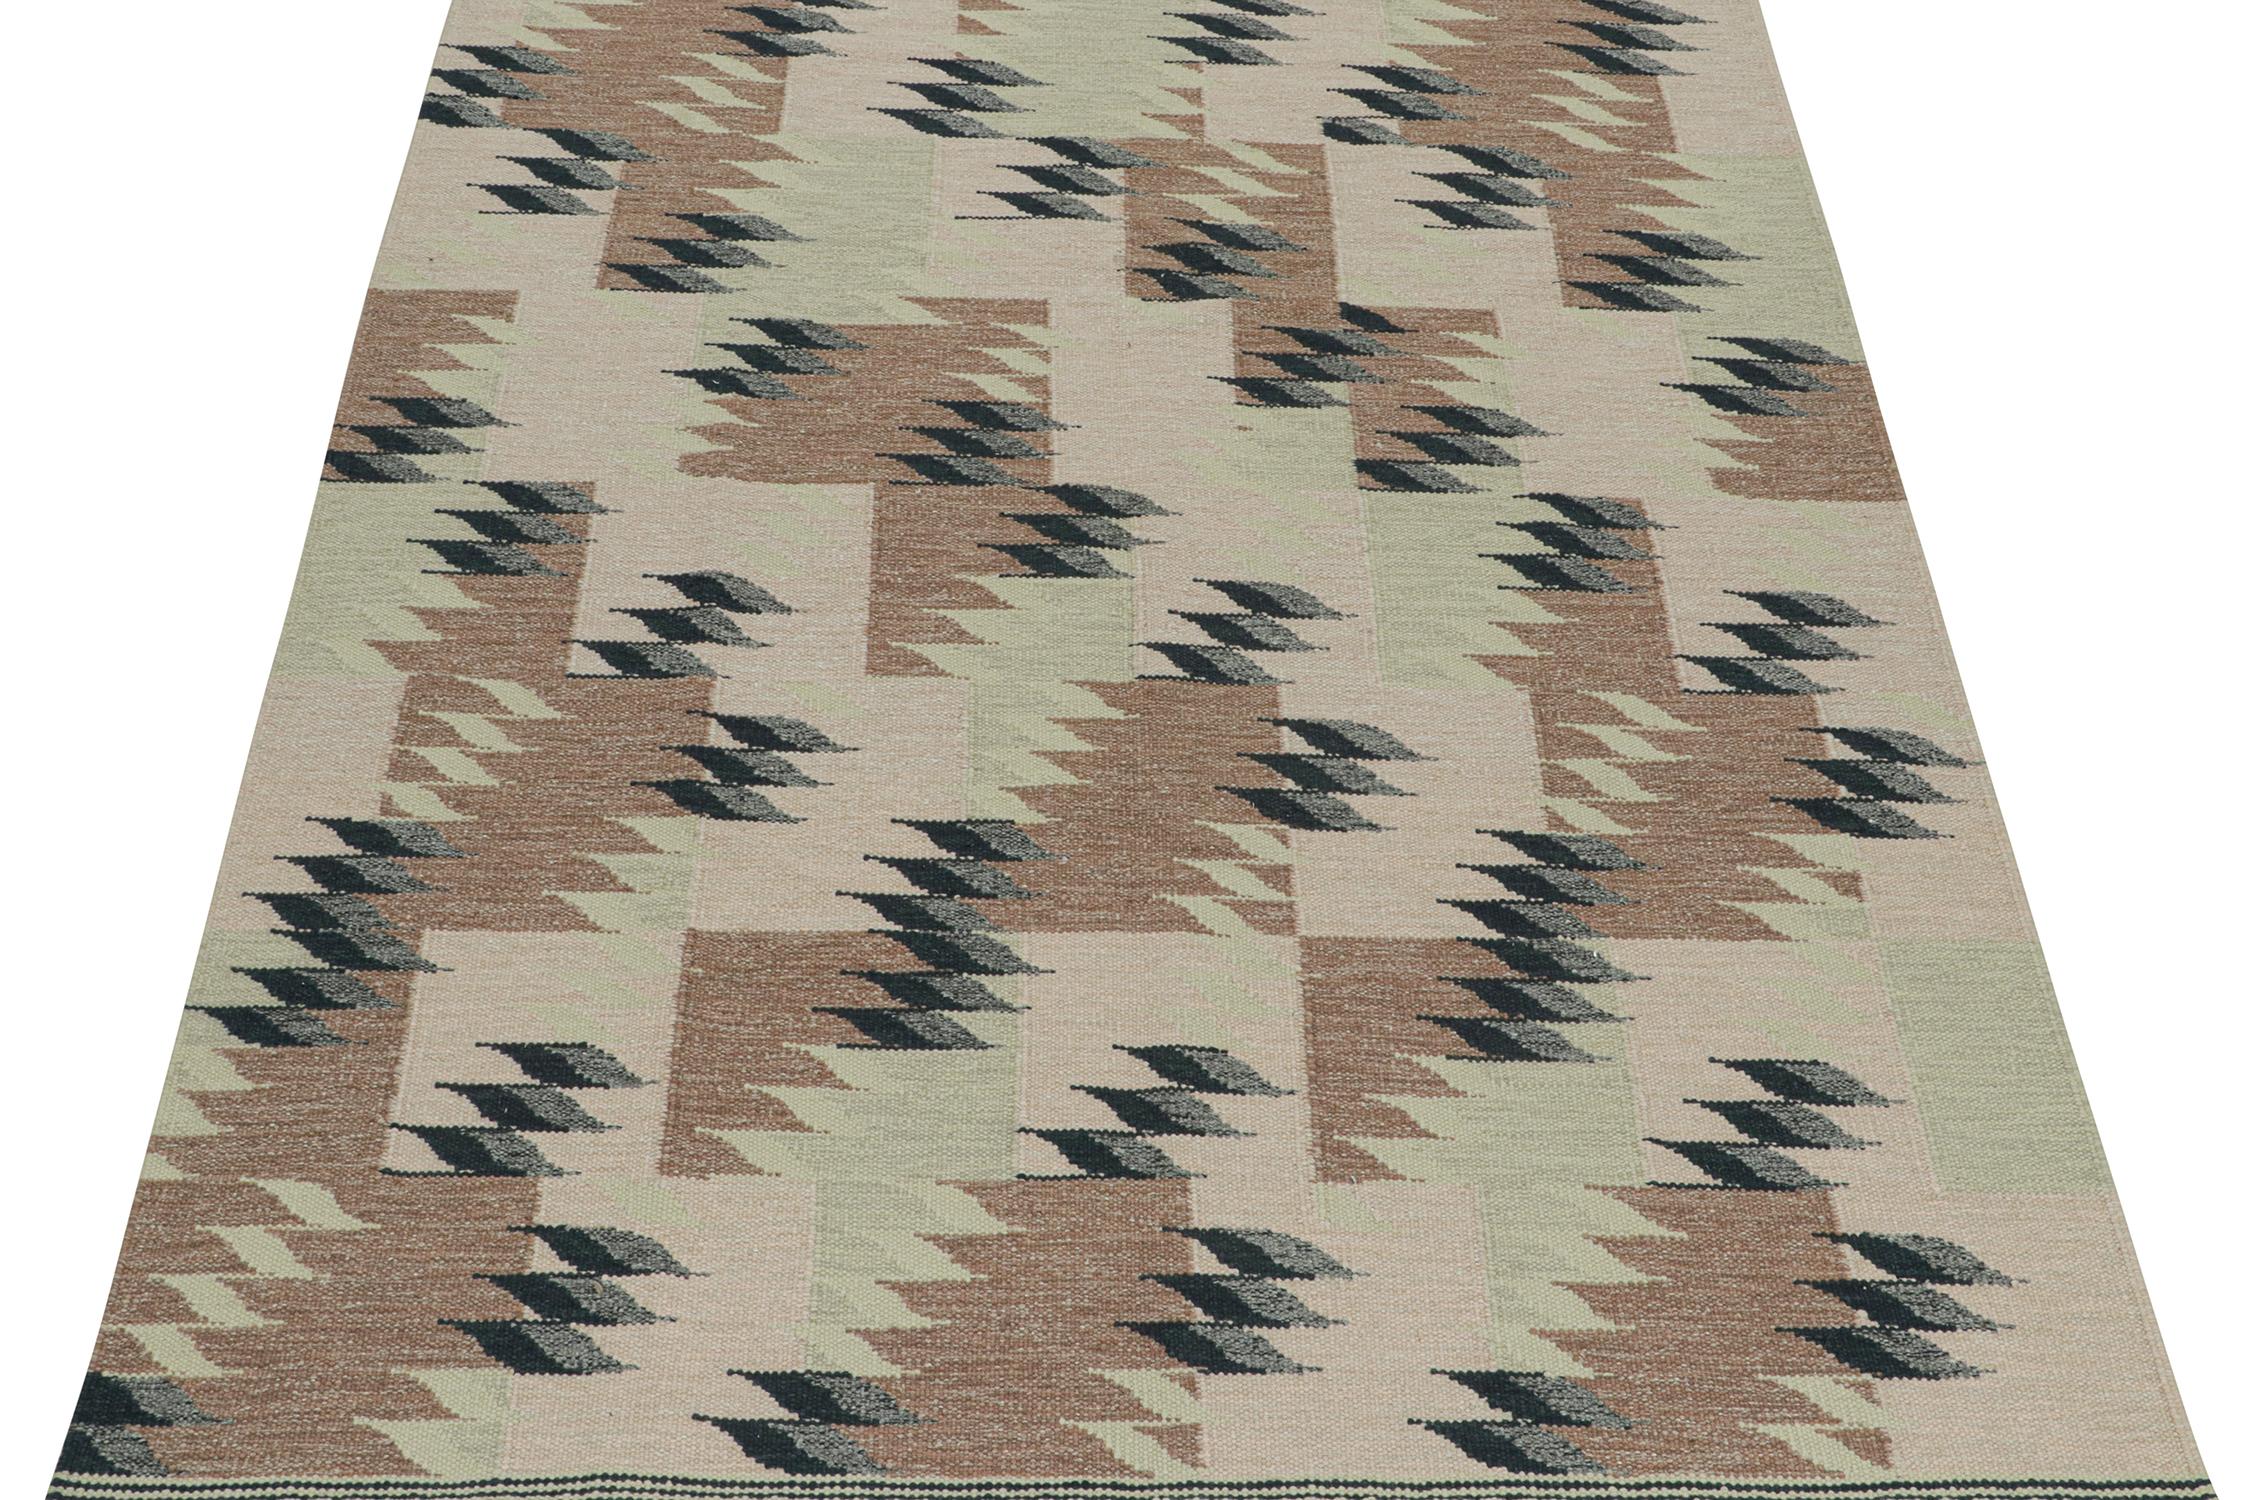 This 8x10 Kilim is a bold new addition to the Scandinavian Collection by Rug & Kilim. Handwoven in wool and natural yarns, its design reflects a contemporary take on mid-century Rollakans and Swedish Deco style.

On the Design:

This new flat weave